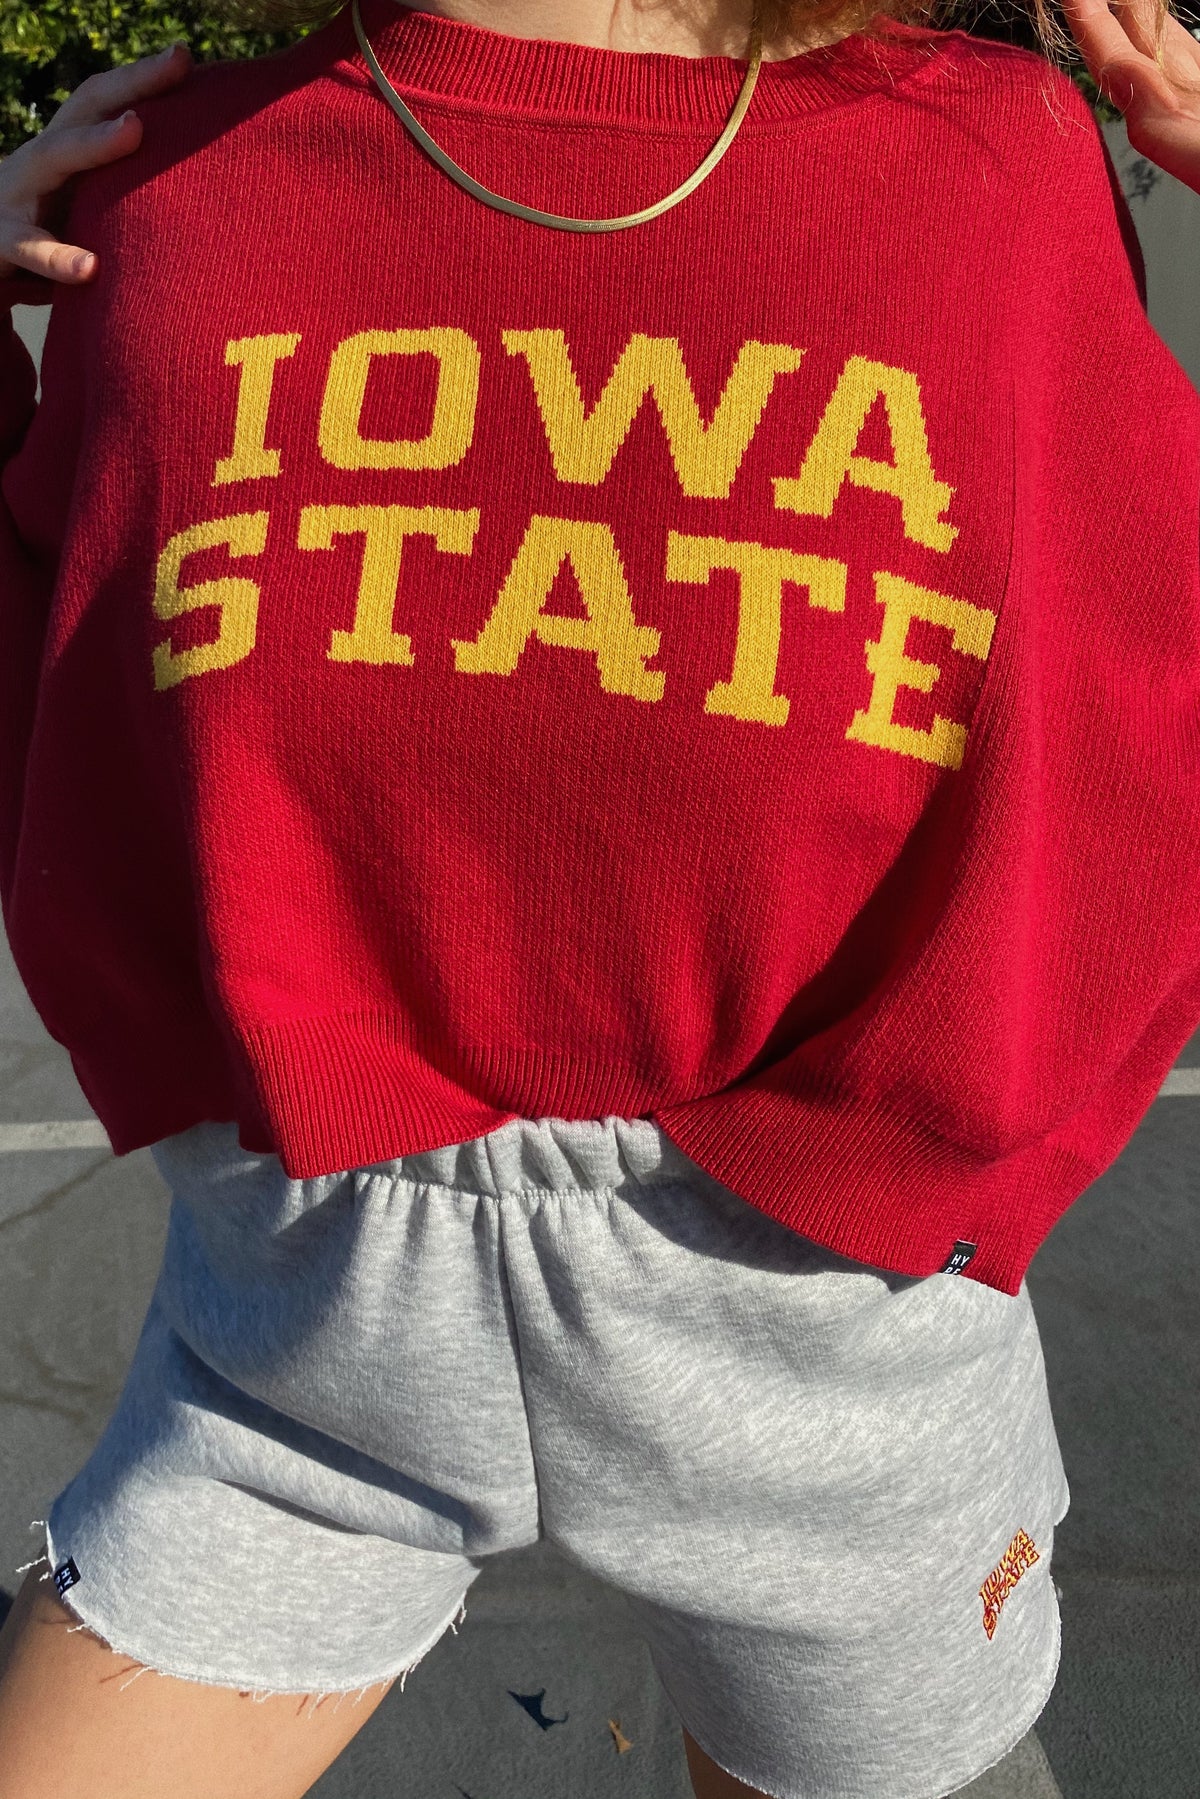 Iowa State Ivy Knitted Sweater